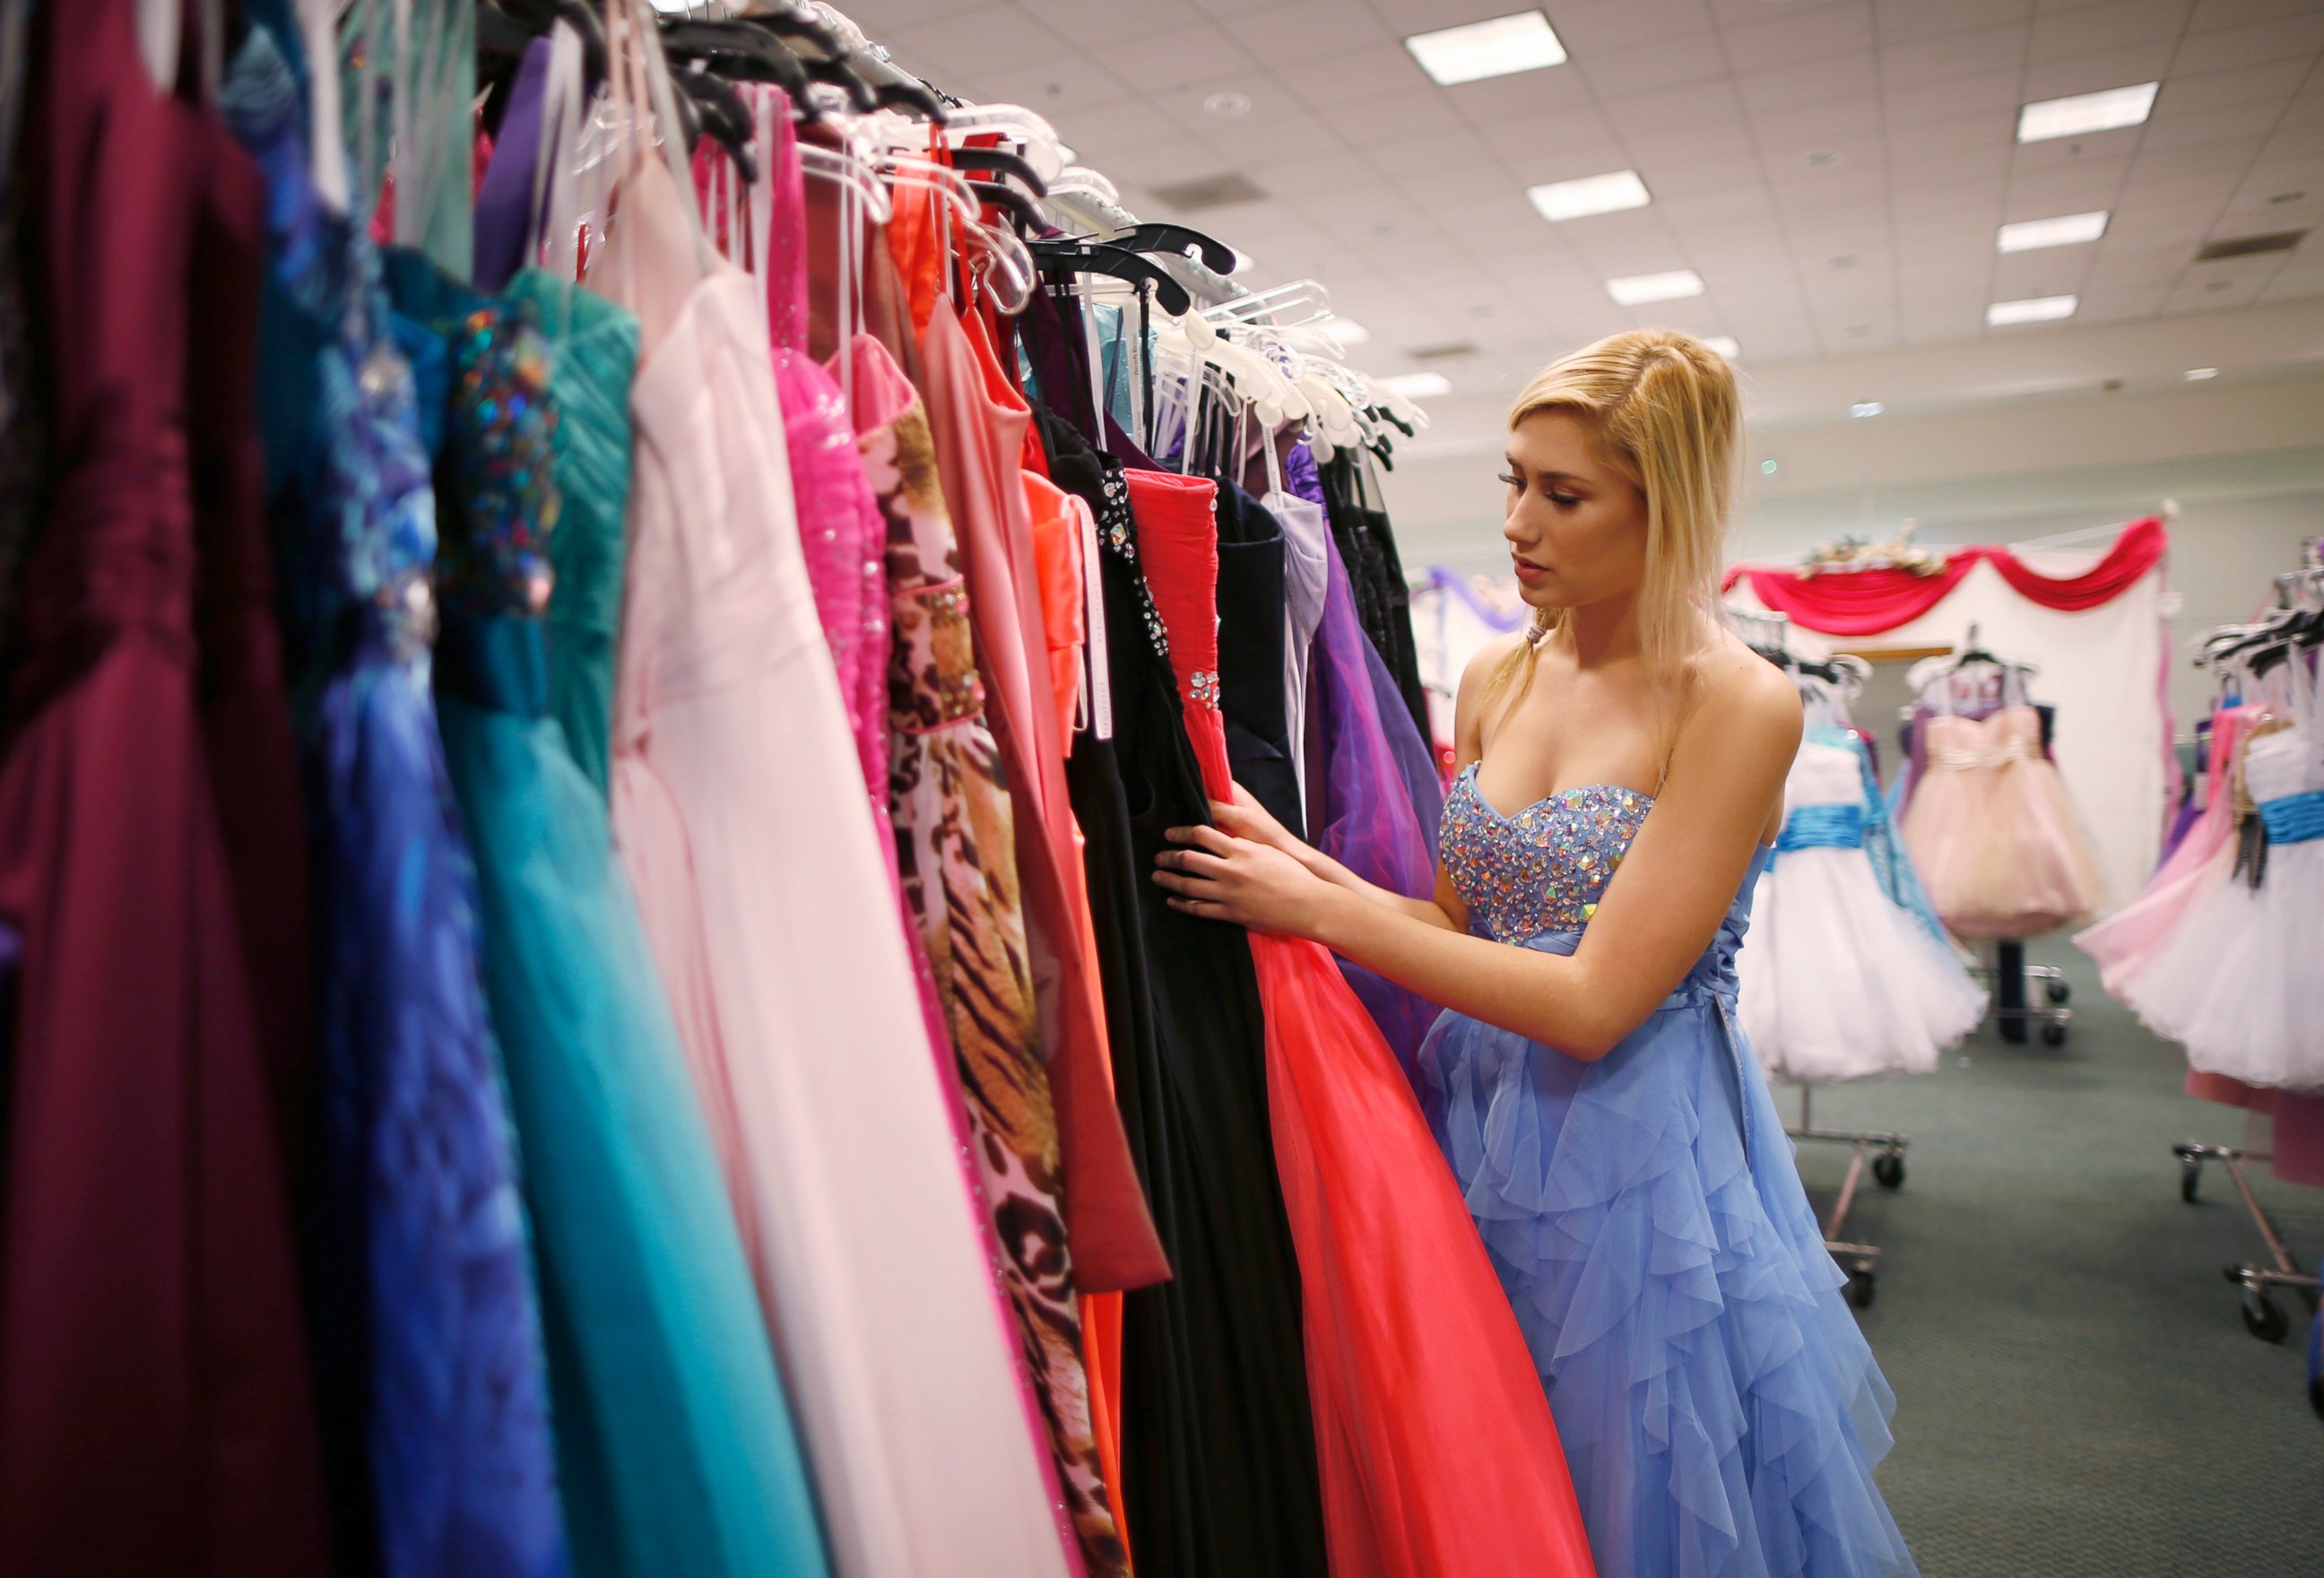 PHOTO: Jasmine Boyle, 17, looks through prom dresses at the Glamour Gowns event in Los Angeles, March 28, 2014.